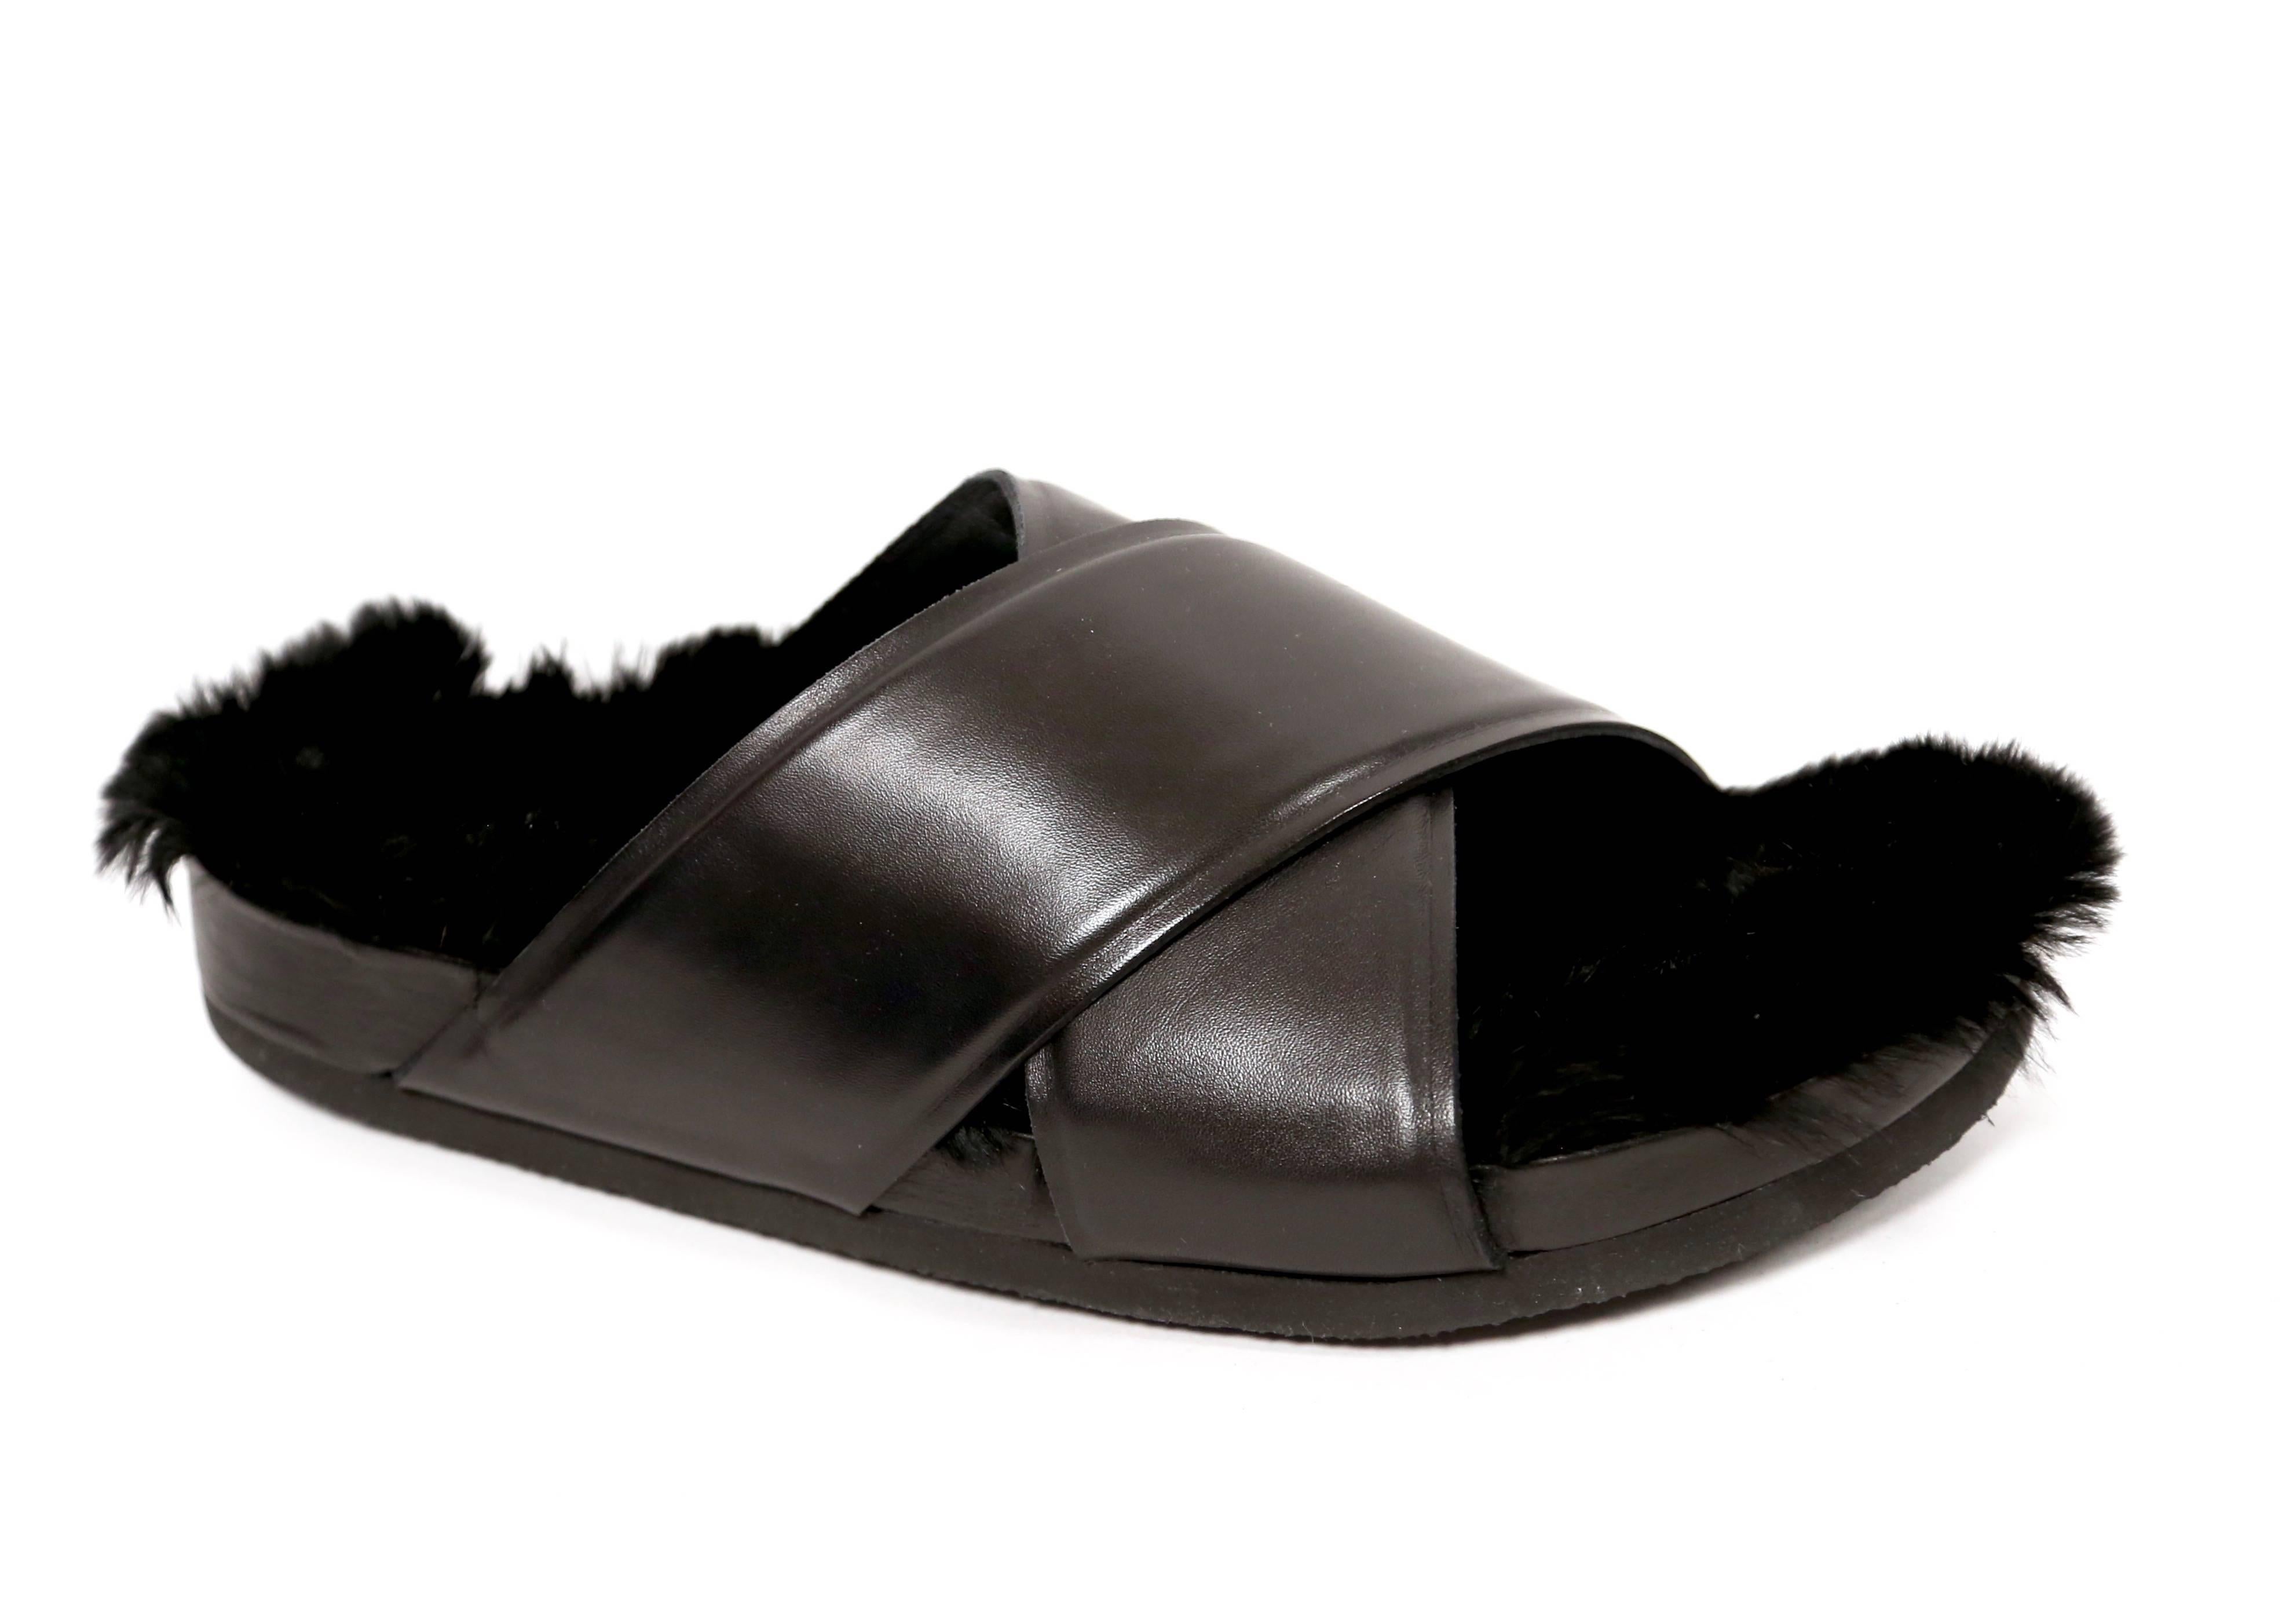 Very well documented rabbit fur and leather 'birkenstock' style sandals designed by Phoebe Philo for Celine exactly as seen on the spring 2013 runway. Size 41 (please know your size).  New with box. Original retail $950.